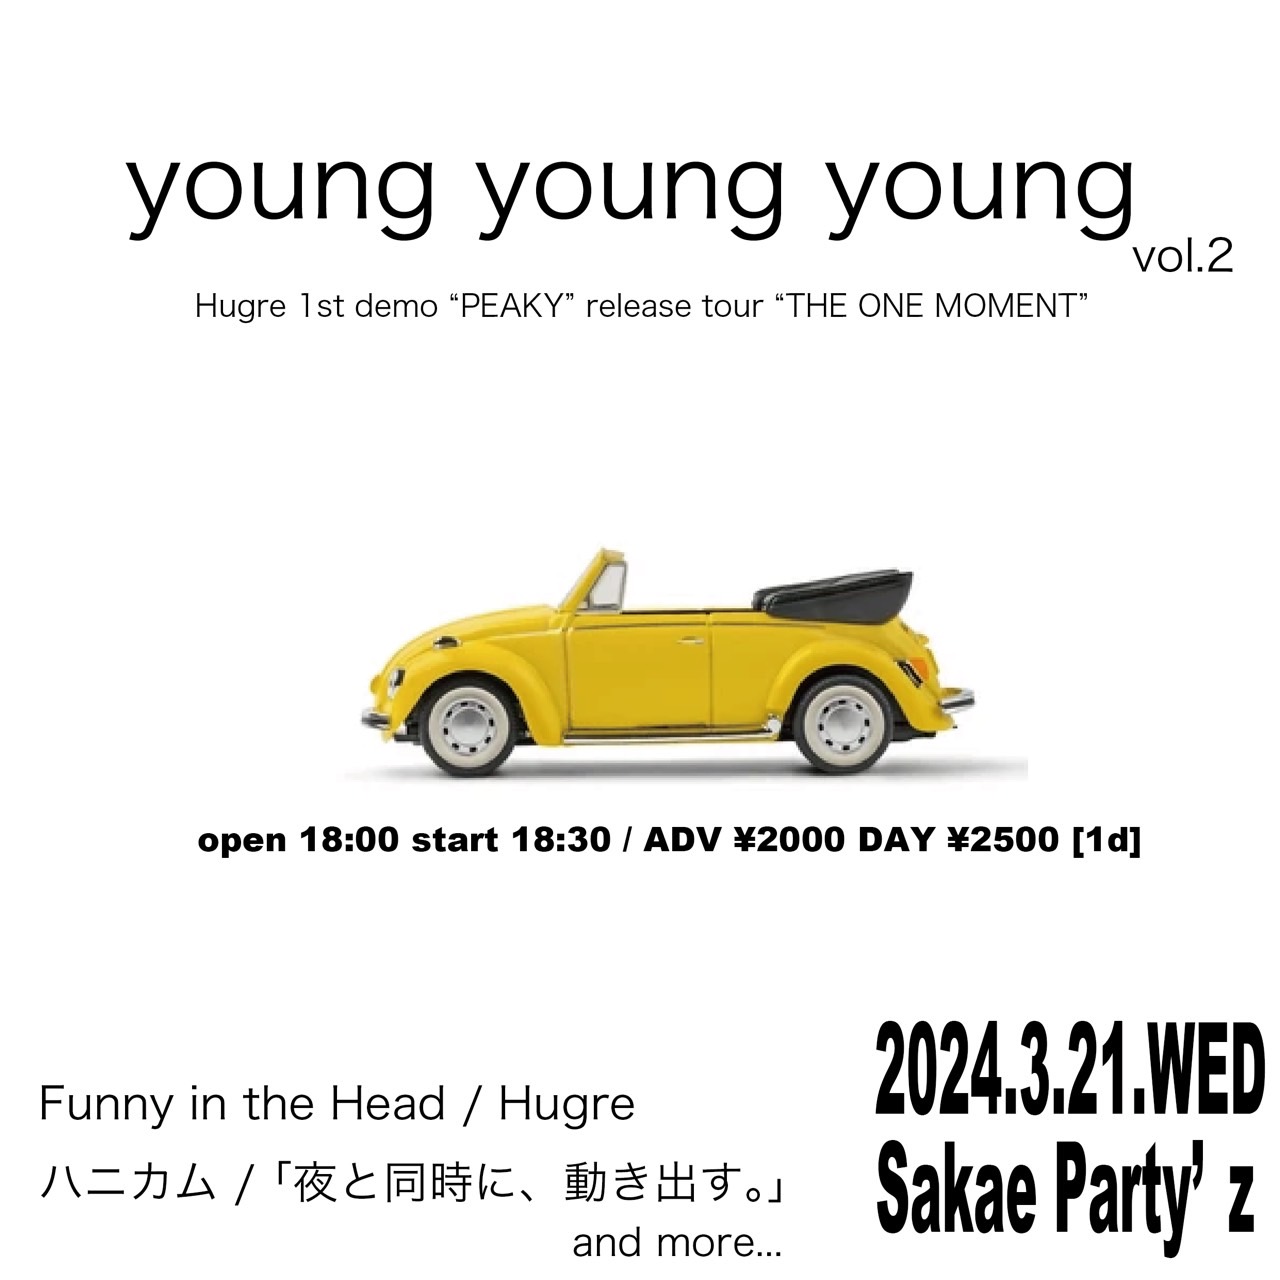 youngyoungyoung vol.2 Hugre 1st demo "PEAKY" release tour "THE ONE MOMENT"